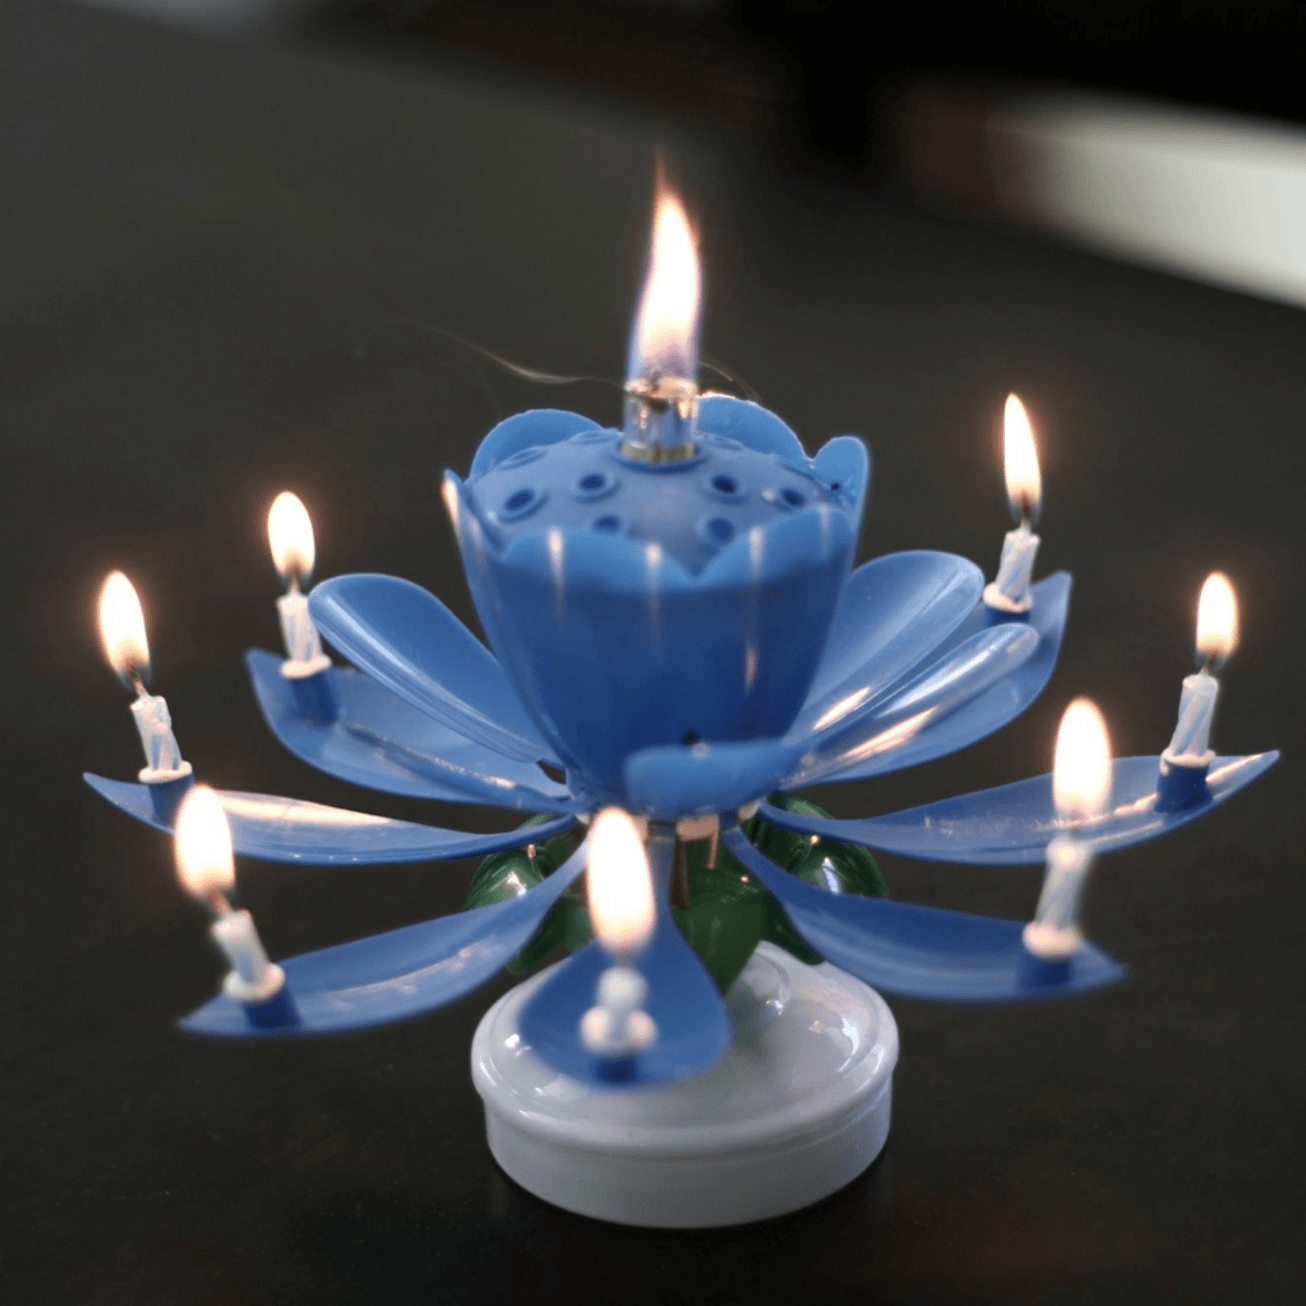 Magical Rotating Lotus Flower Candle Is A Beautiful